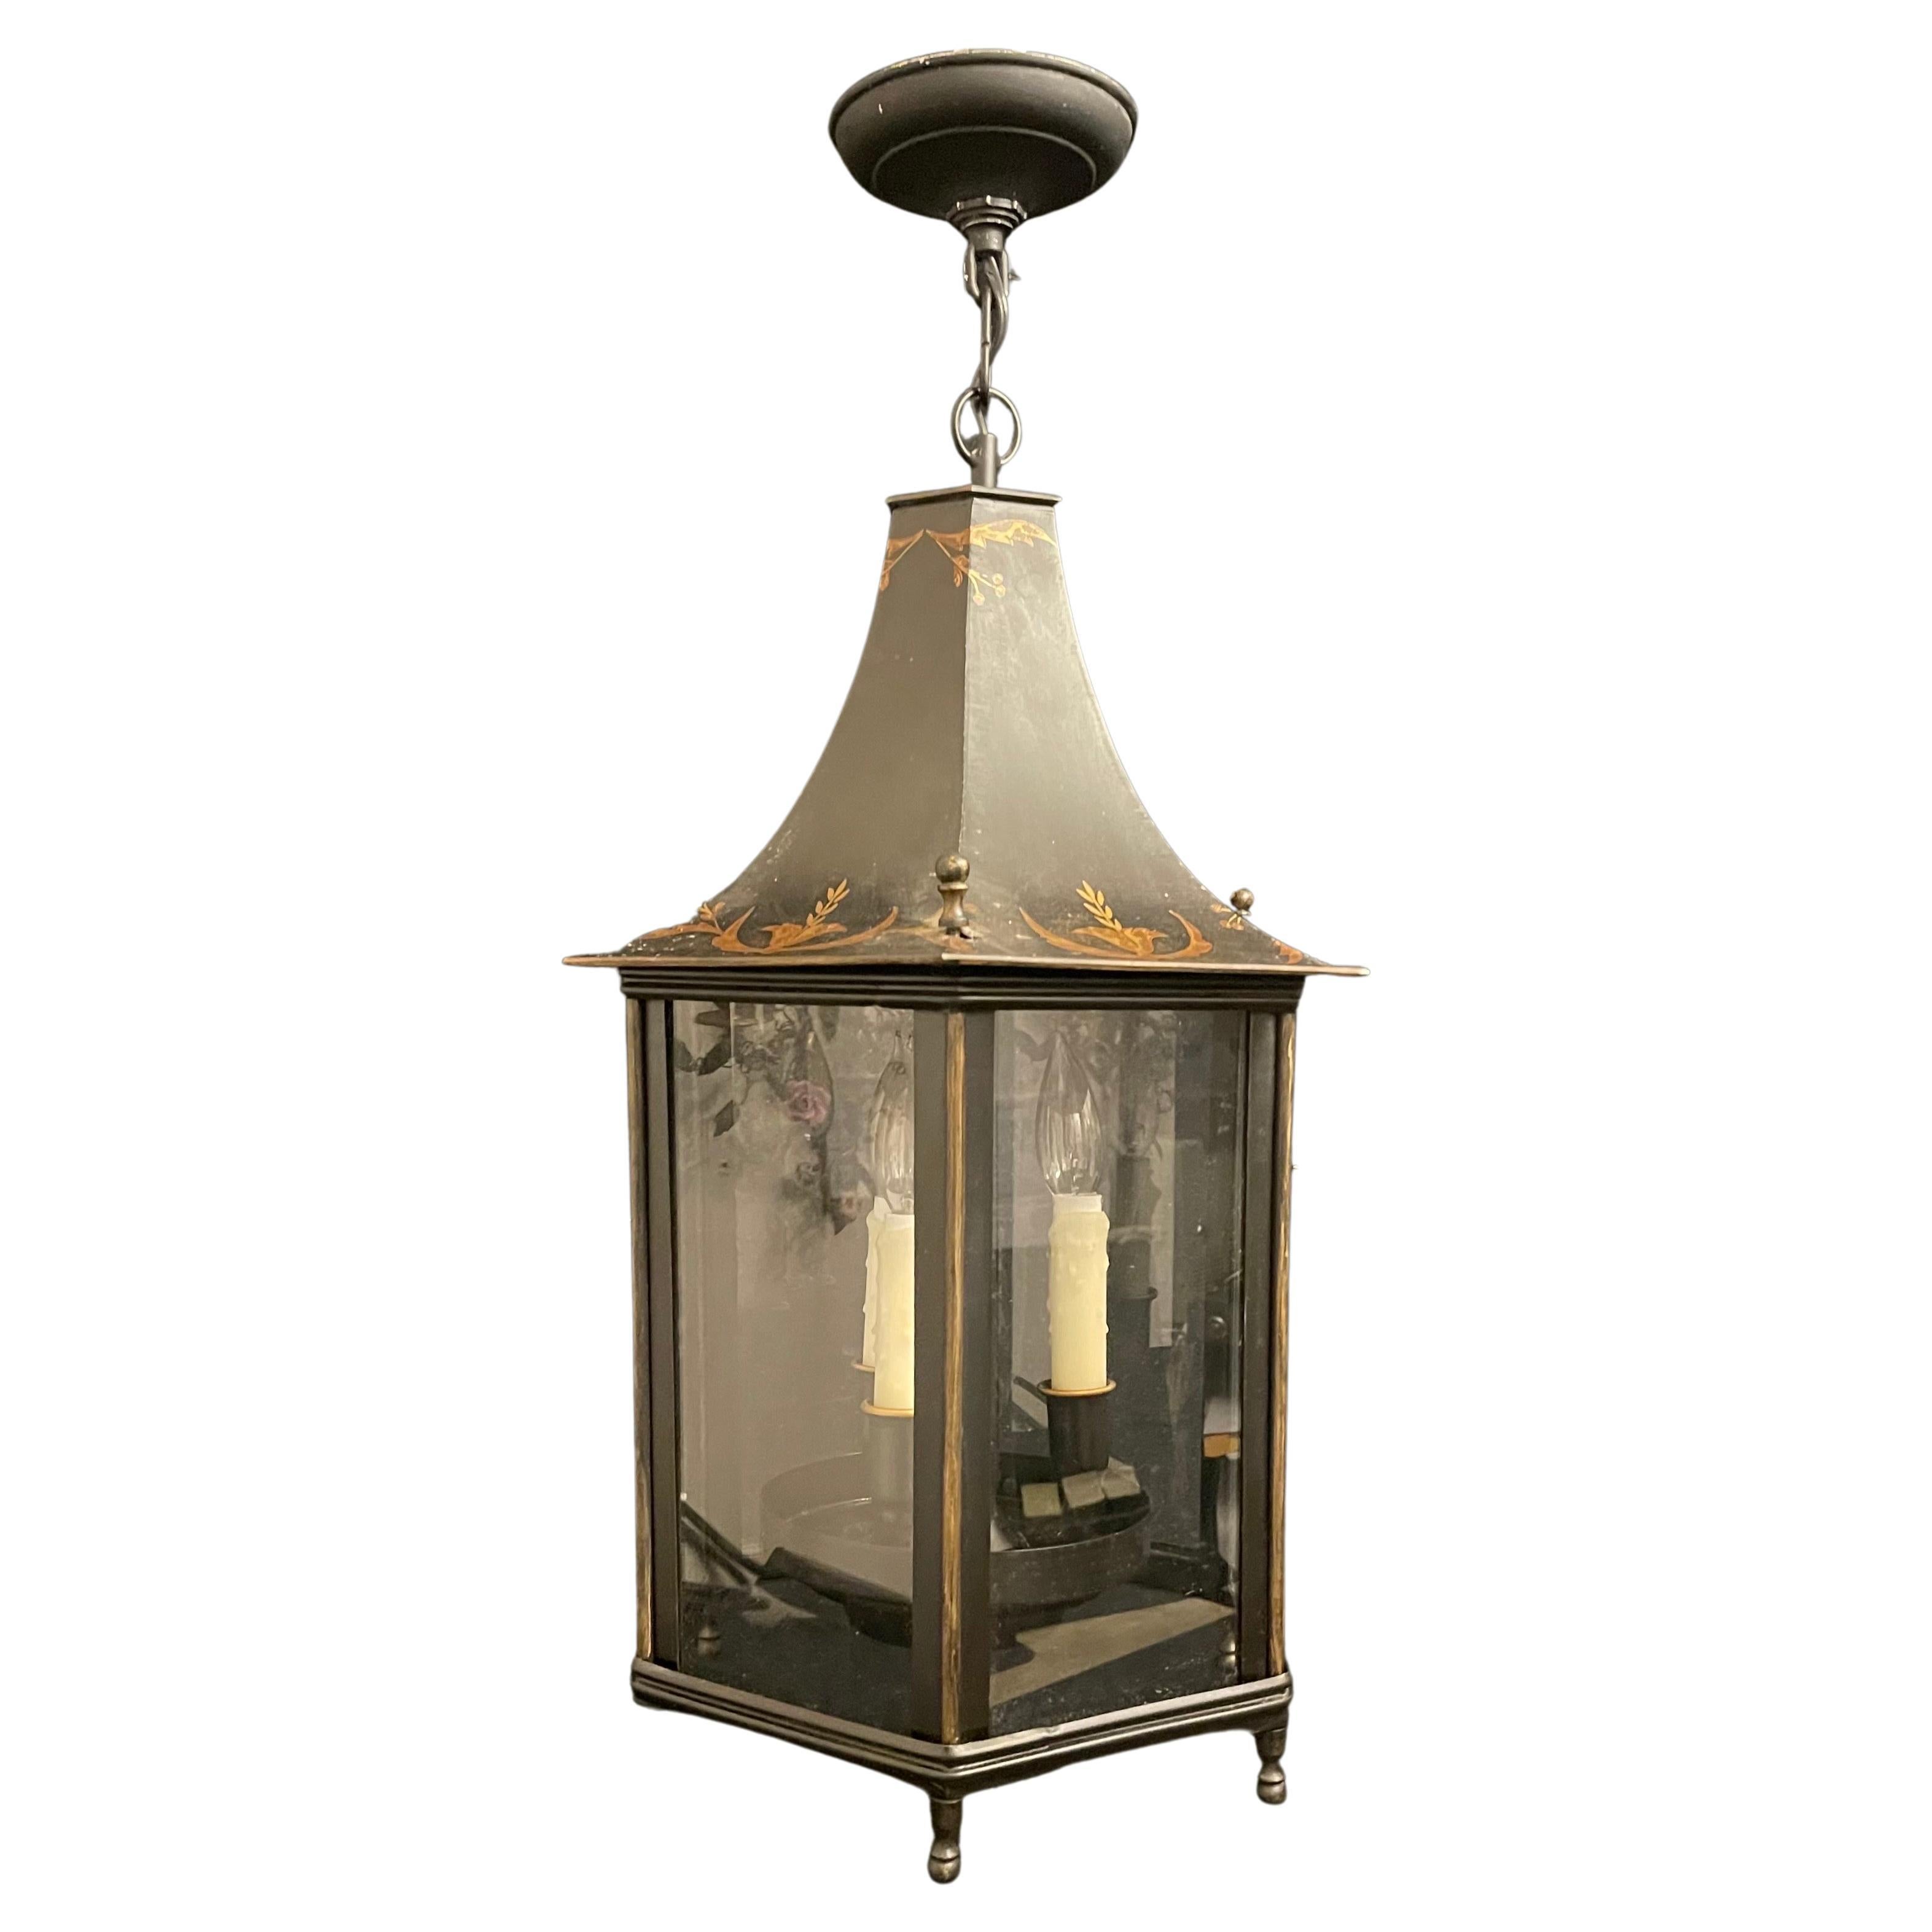 A Wonderful Black Tole with Antique Gold Hand Painted decoration, Pagoda Octagonal Form Chinoiserie Lantern Pendent Fixture Having 3 Candelabra Lights.
Accompanied By Chain Canopy And Mounting Hardware For Installation.